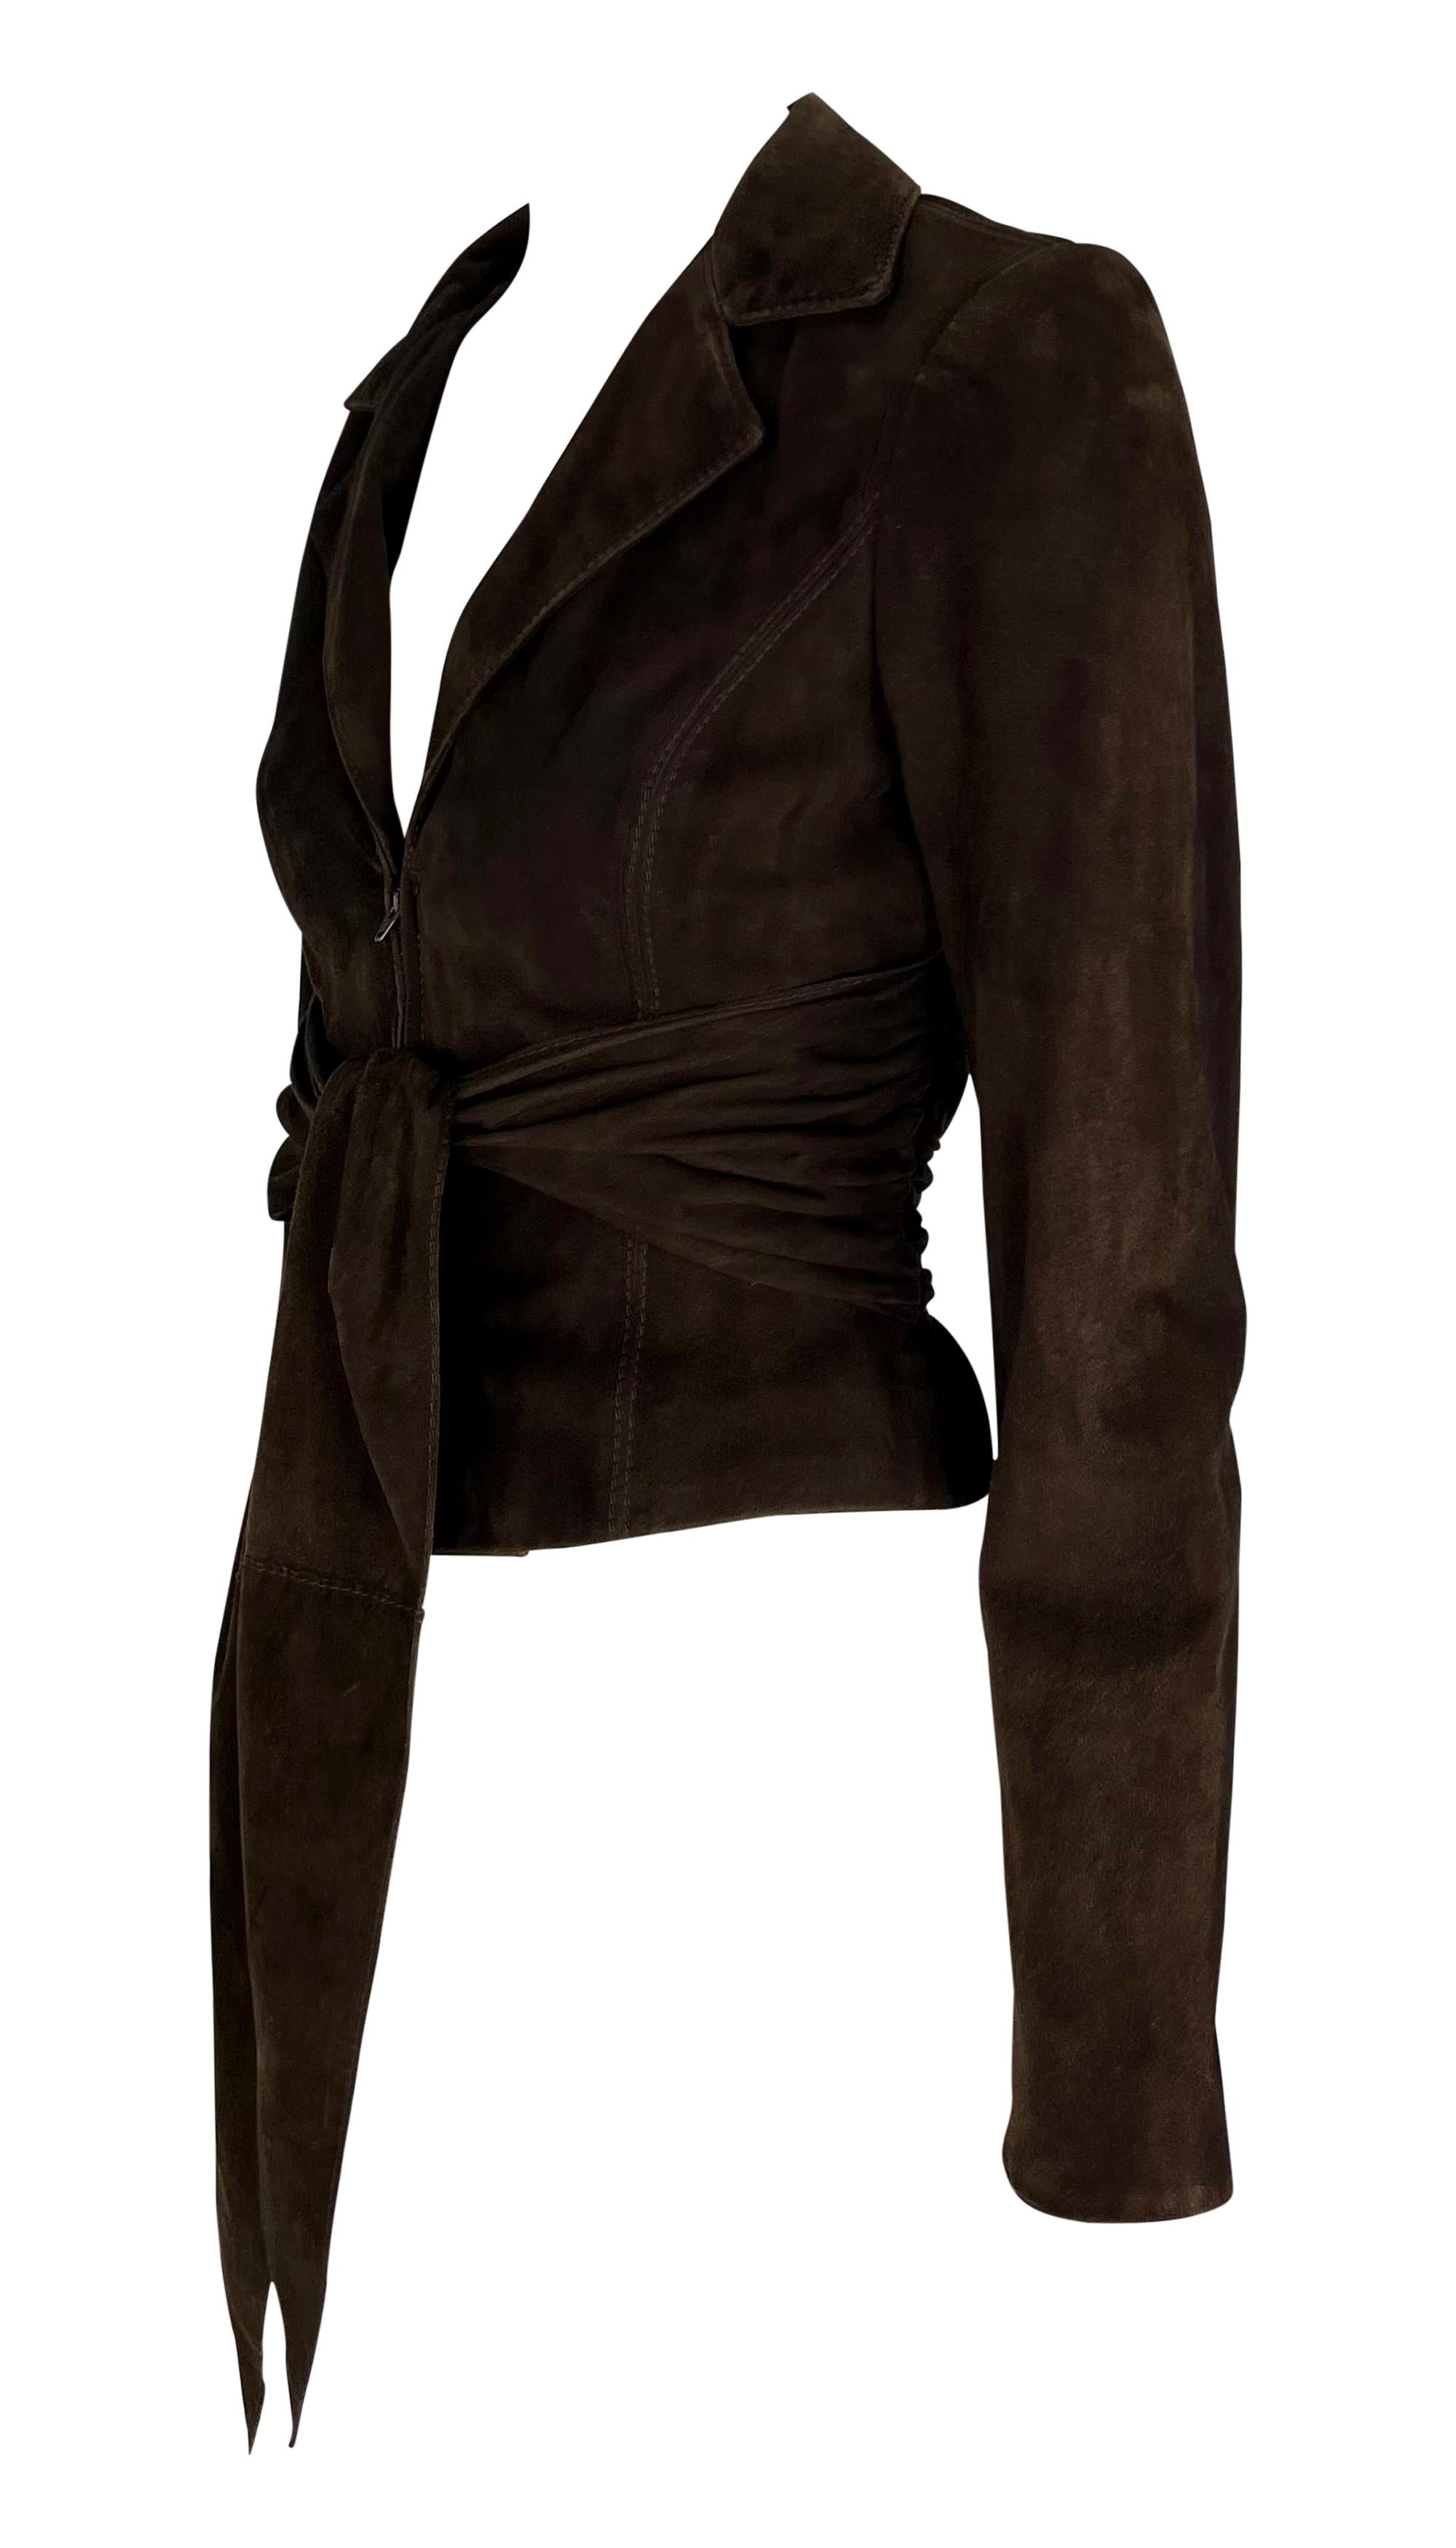 2000s Valentino Garavani Dark Brown Suede Tie-Front Leather Jacket In Excellent Condition For Sale In West Hollywood, CA